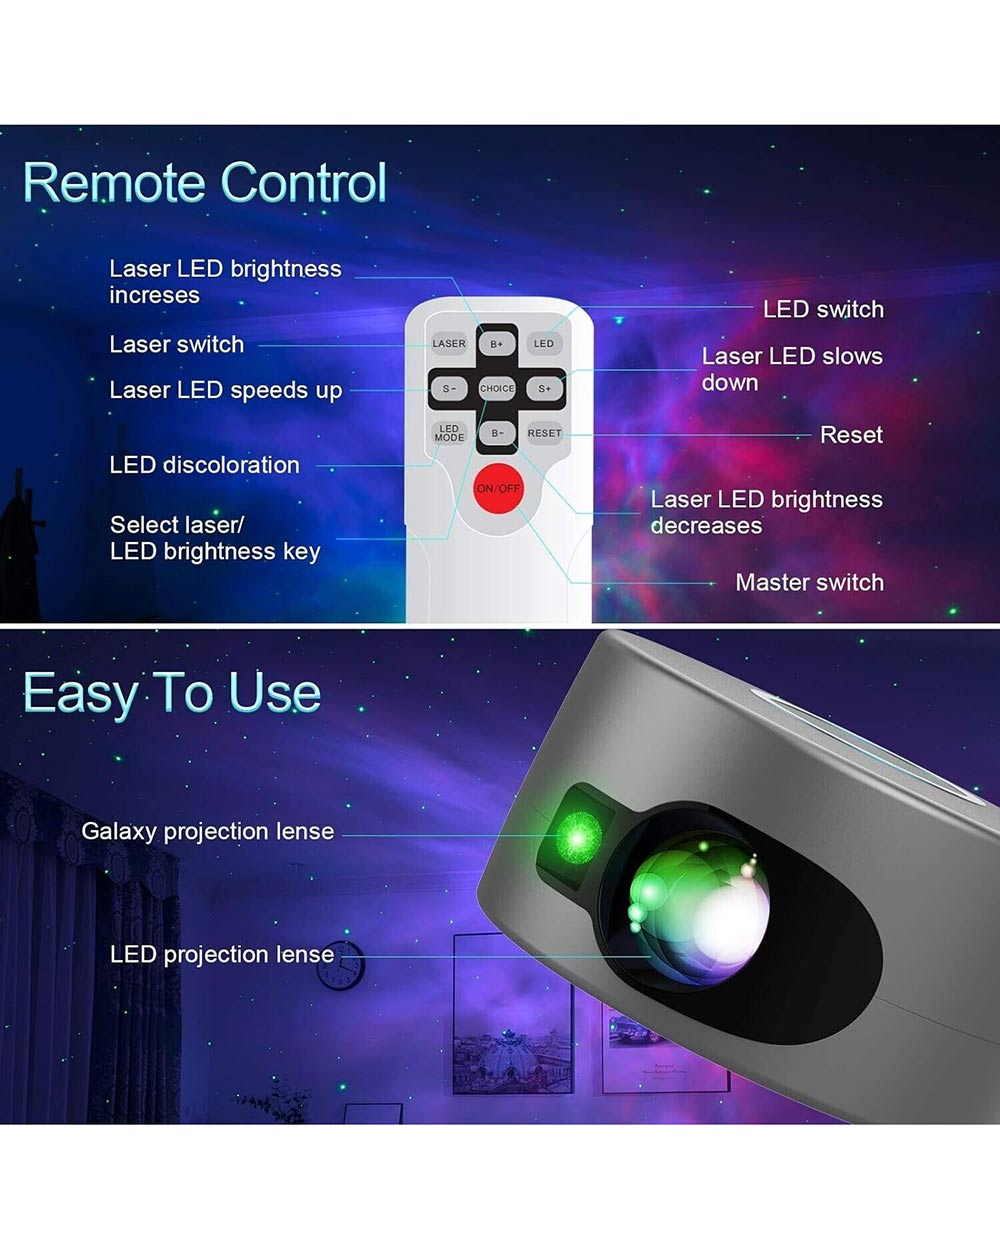 Bozhihong LED Galaxy Projector with Remote Control for Kids